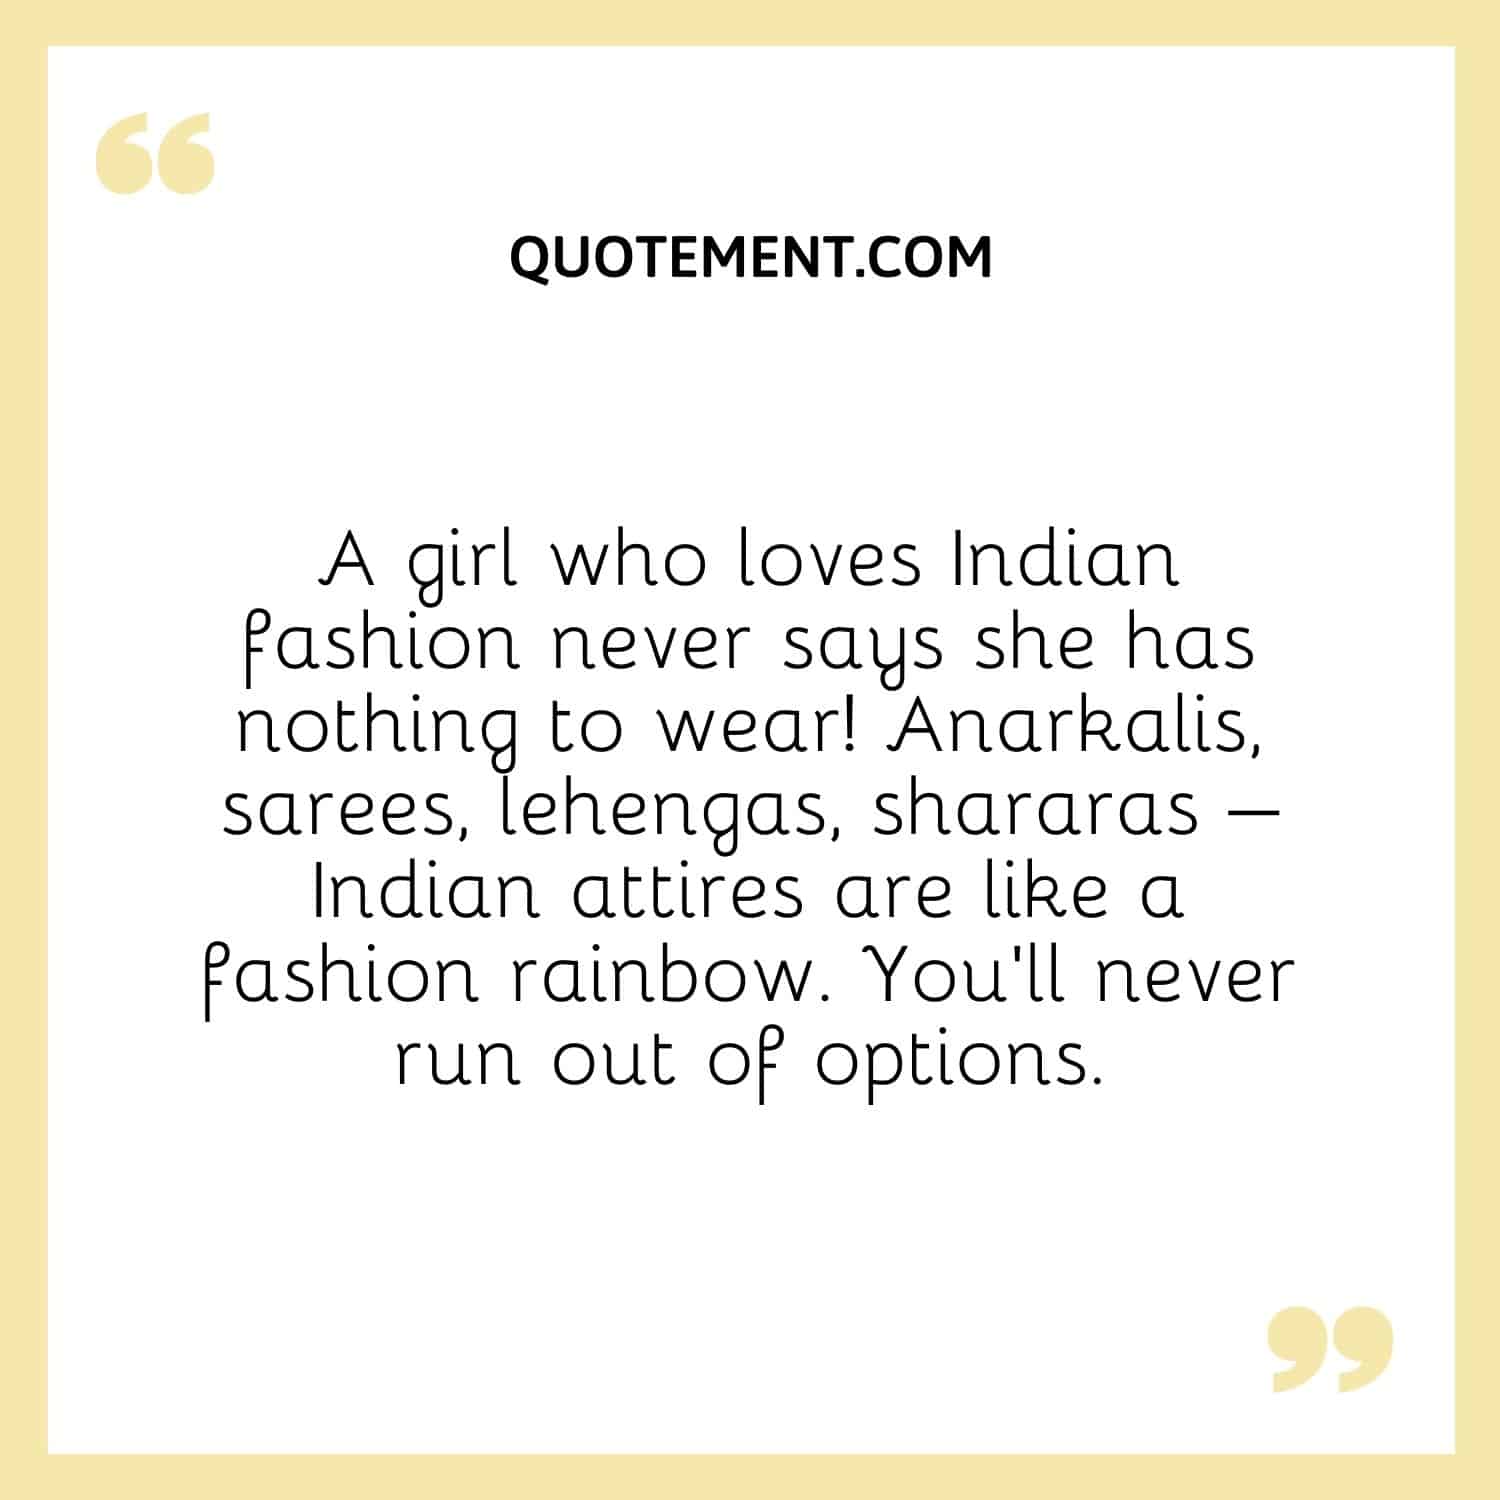 A girl who loves Indian fashion never says she has nothing to wear! Anarkalis, sarees, lehengas, shararas – Indian attires are like a fashion rainbow. You’ll never run out of options.